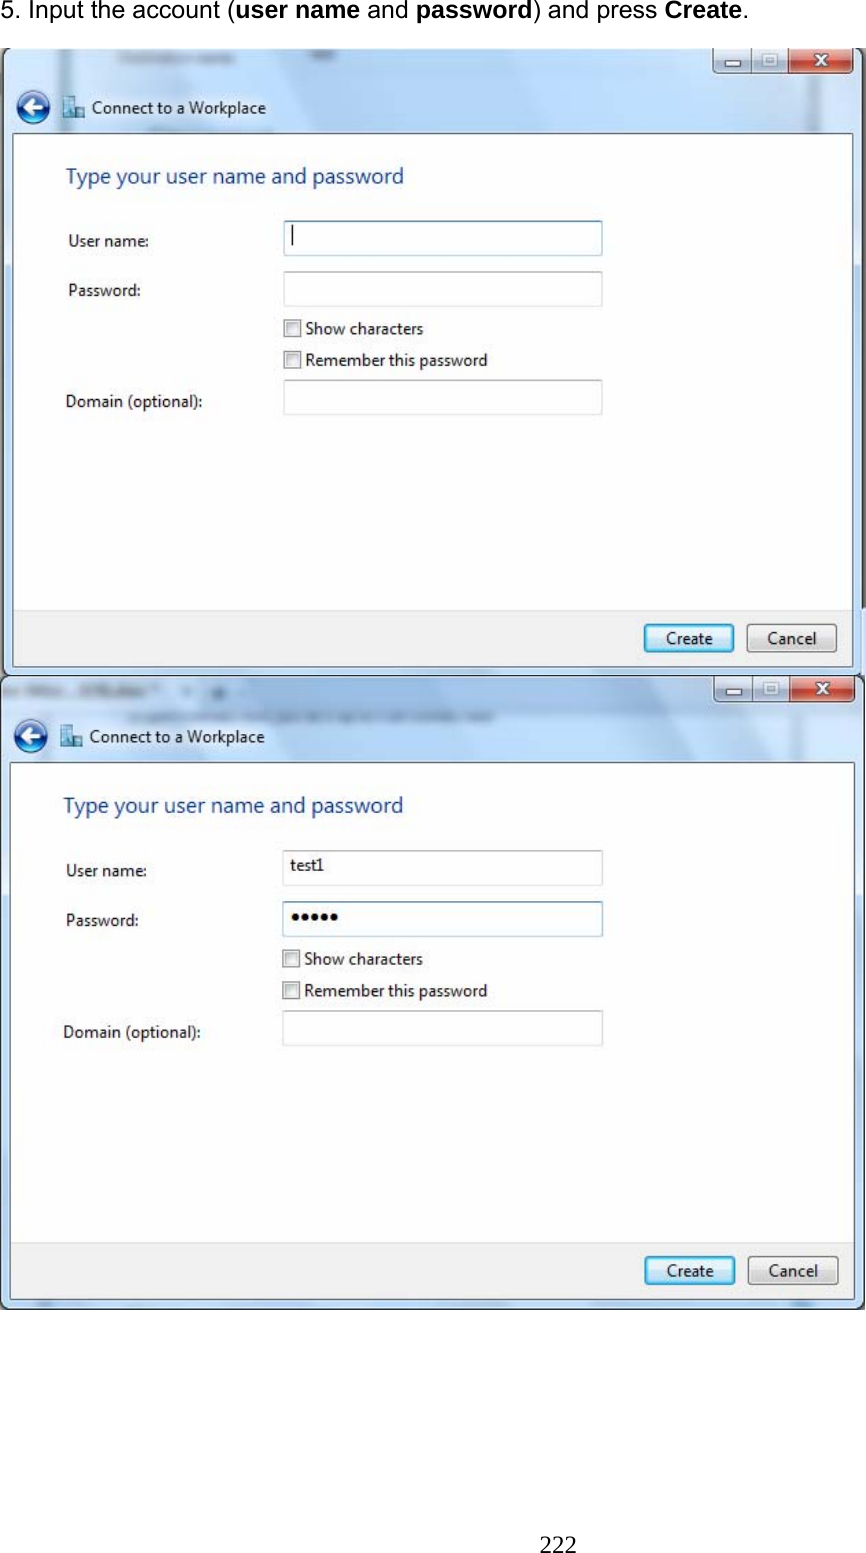 222 5. Input the account (user name and password) and press Create.         